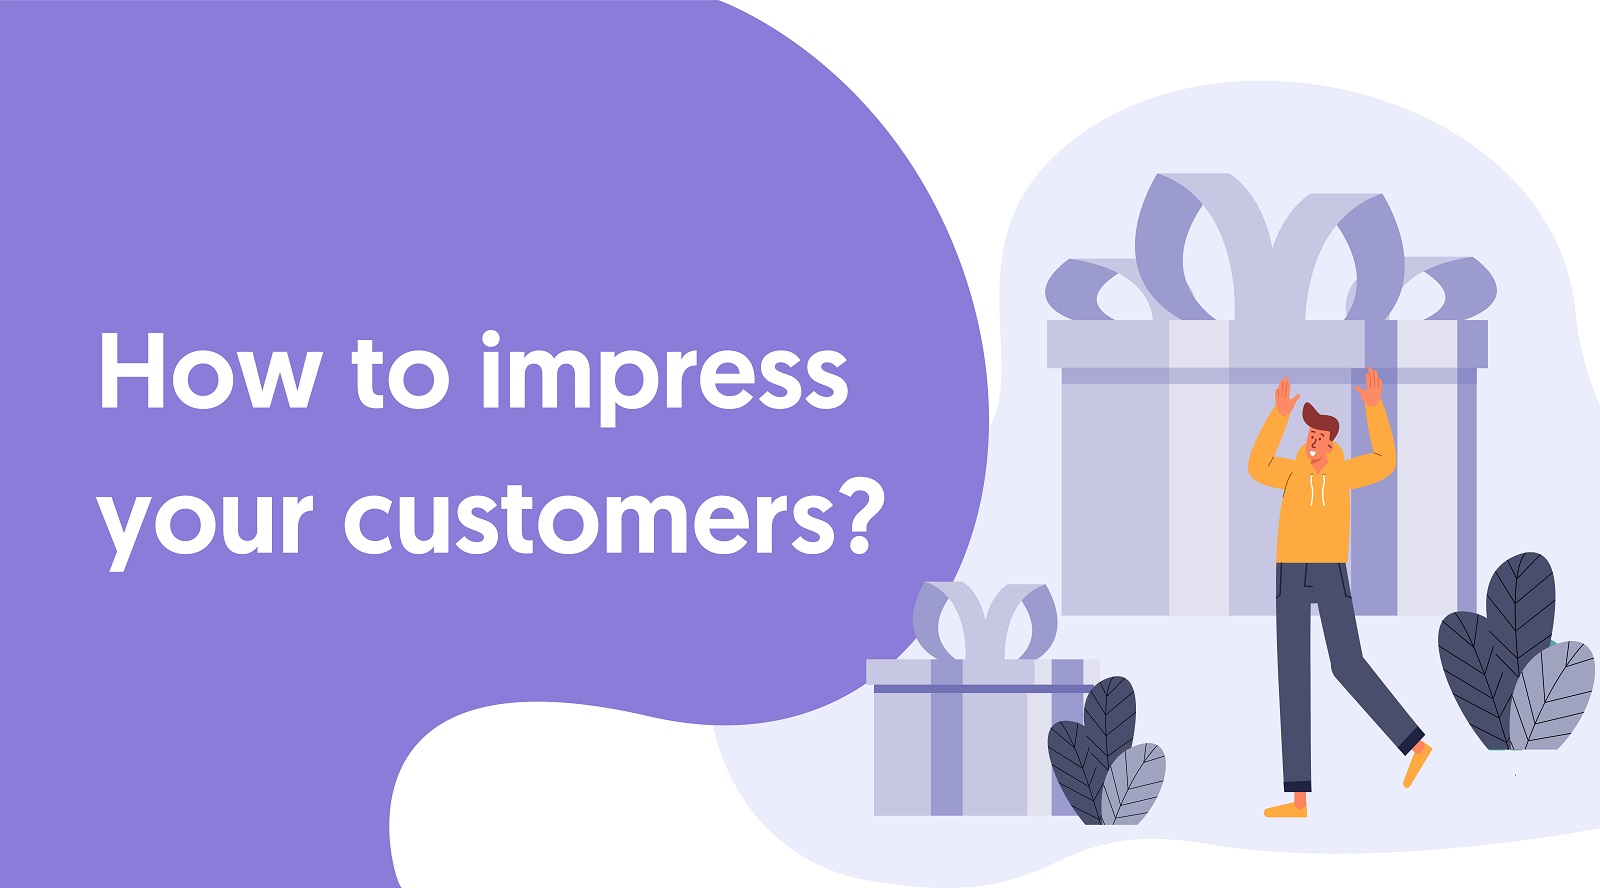 How to impress your customers